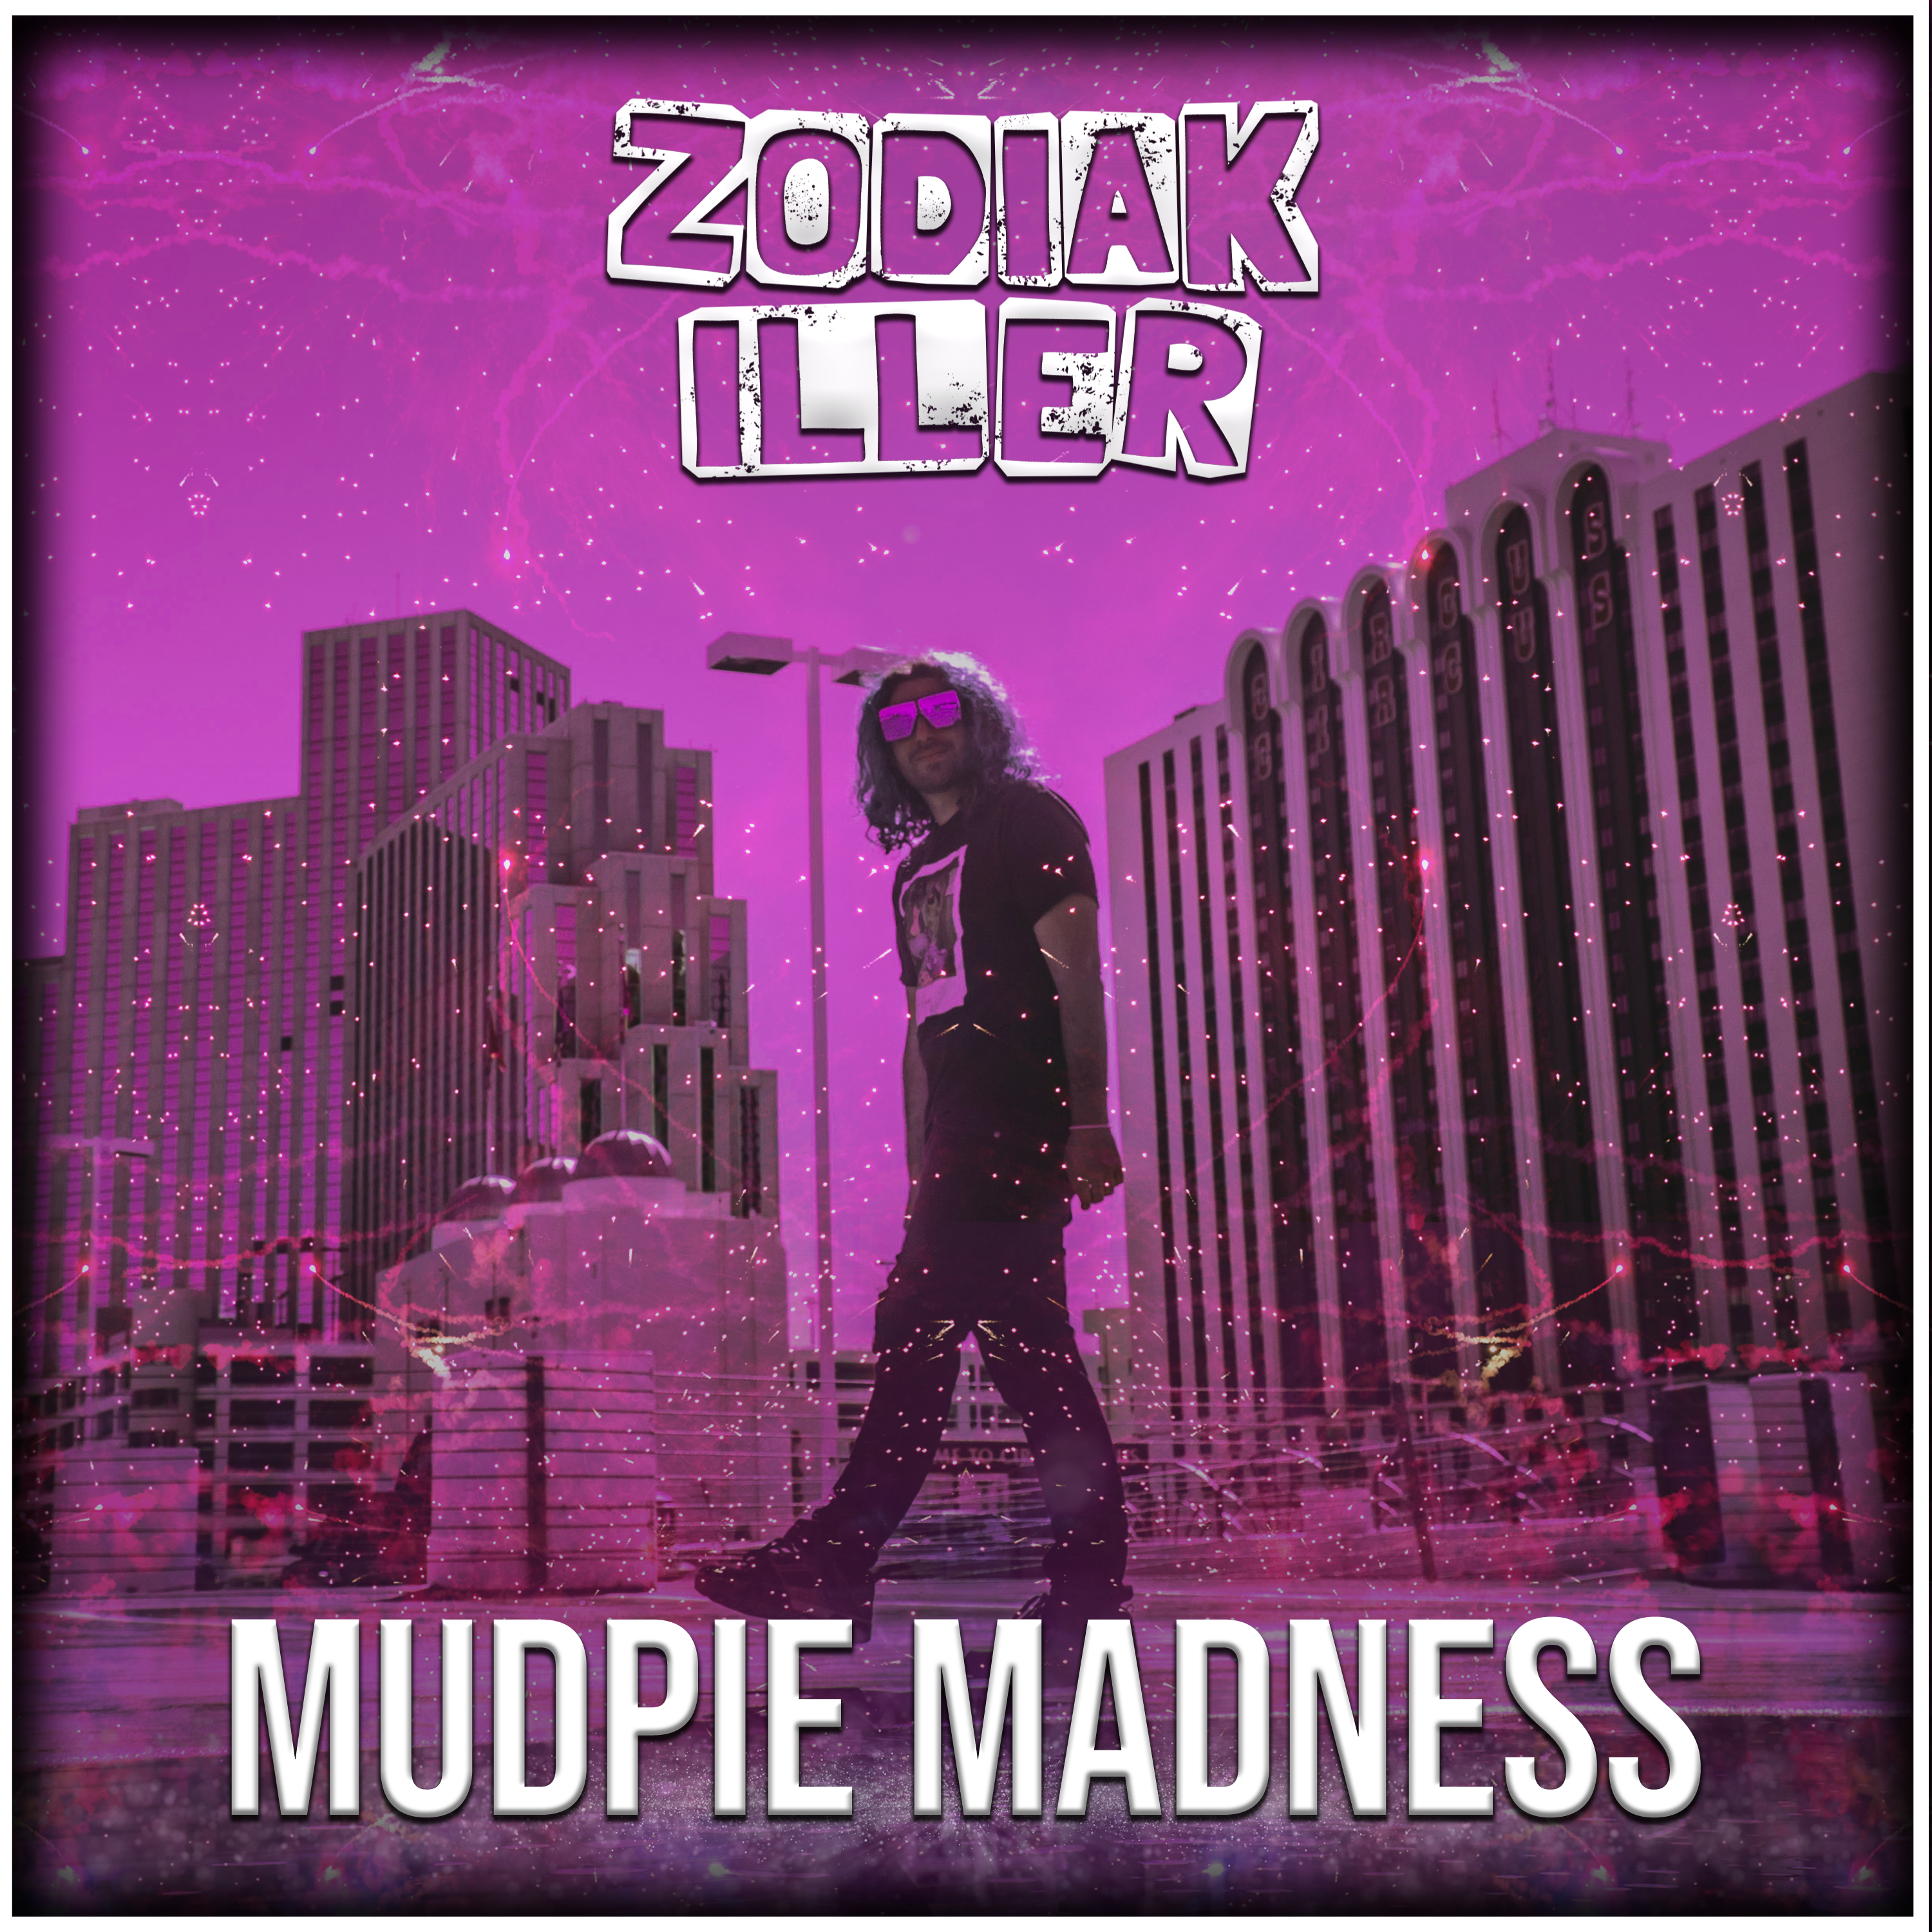 Hey Music Producer! Check out the Zodiak Killer Mudpie Madness Sound Pack and other DJ Sample Packs on Producer DJ